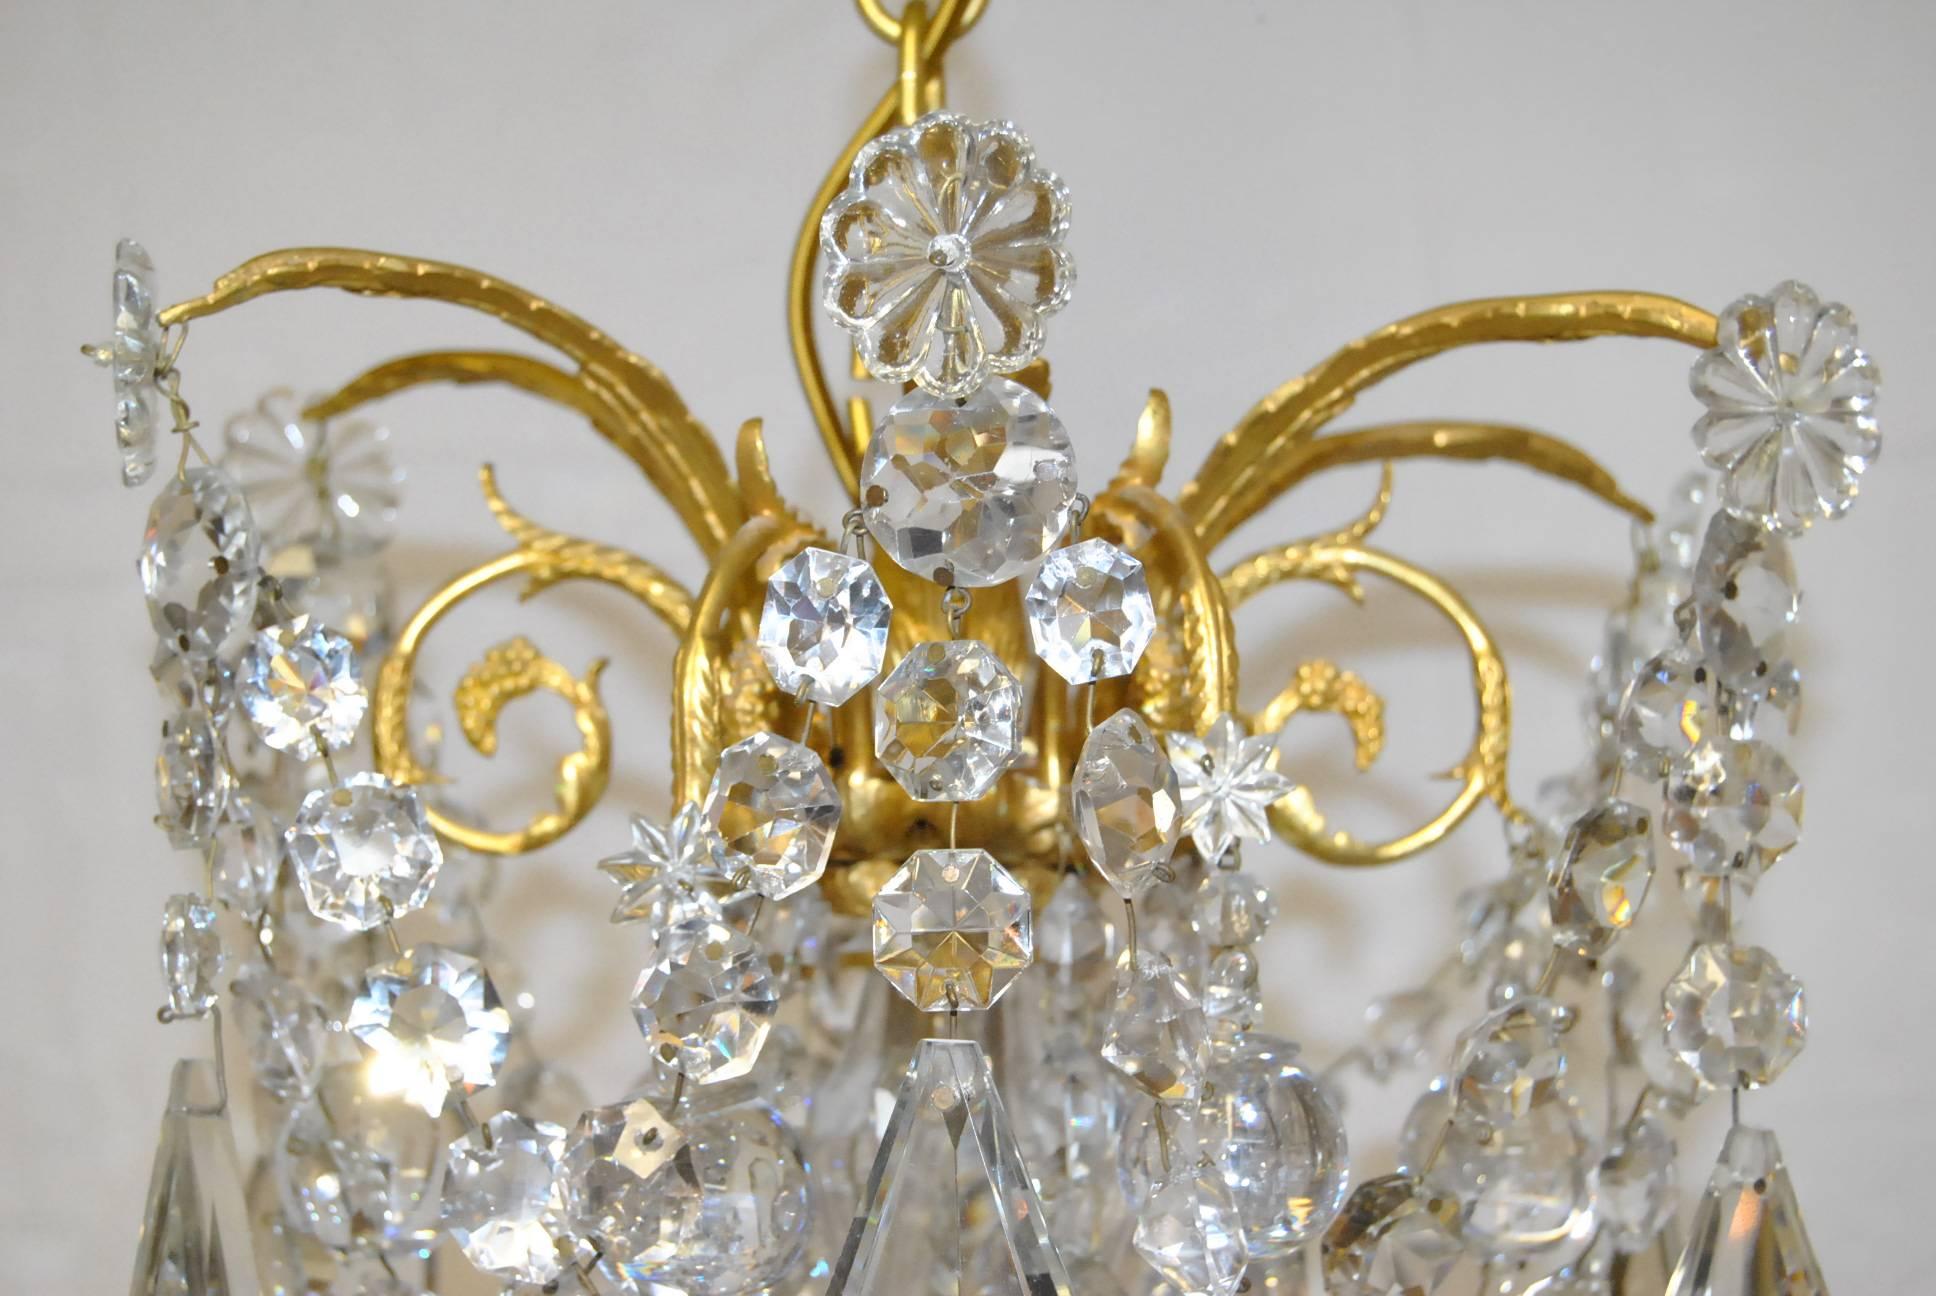 French Empire Gilded Bronze Crystal 12-Arm Chandelier Light Fixture In Good Condition For Sale In Toledo, OH